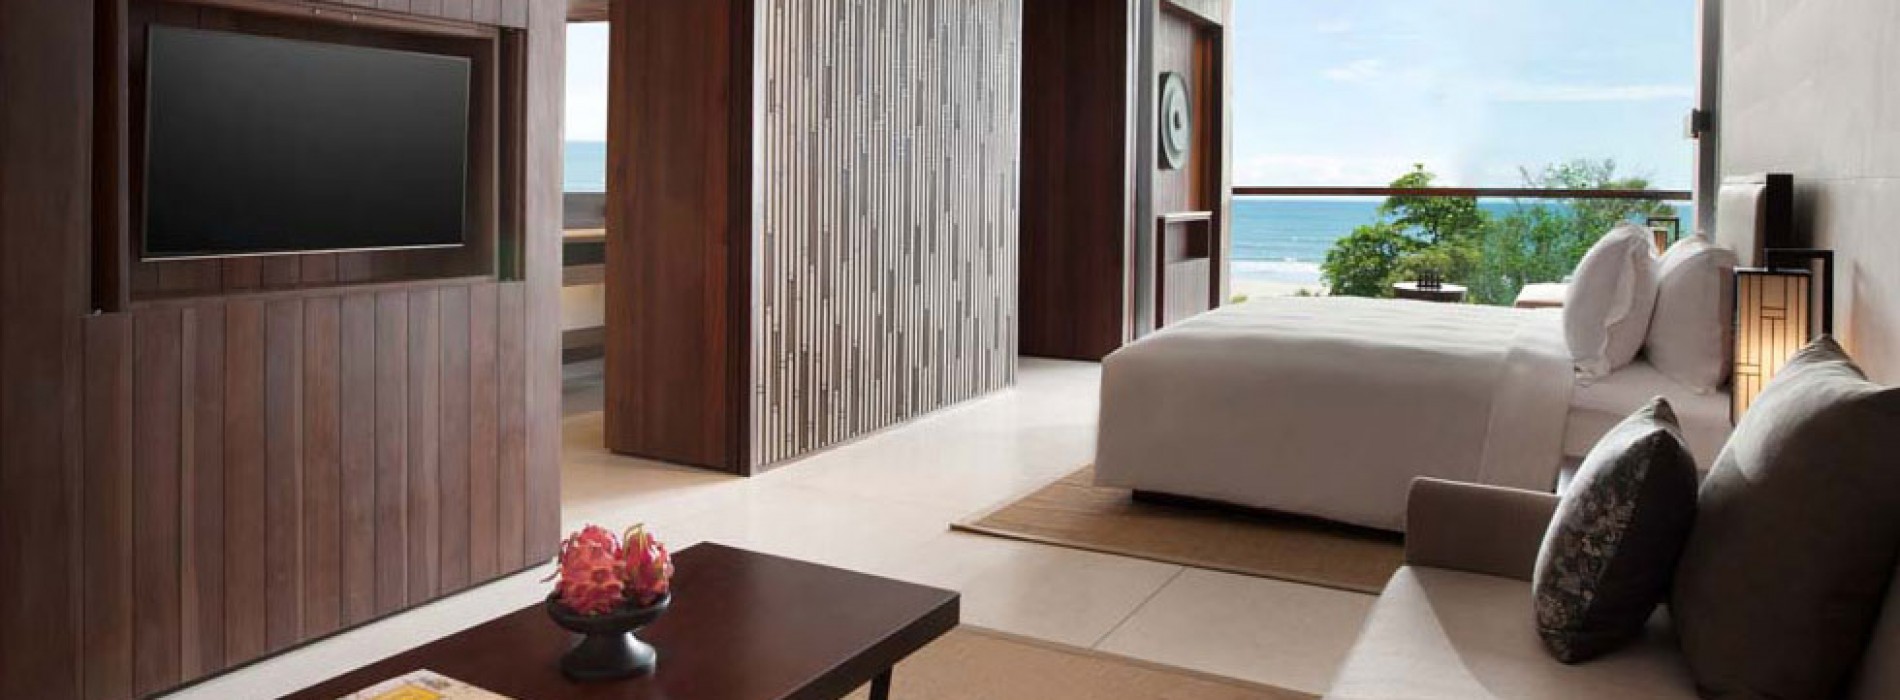 ALILA SEMINYAK– ON THE BEACH AND MAKING WAVES!